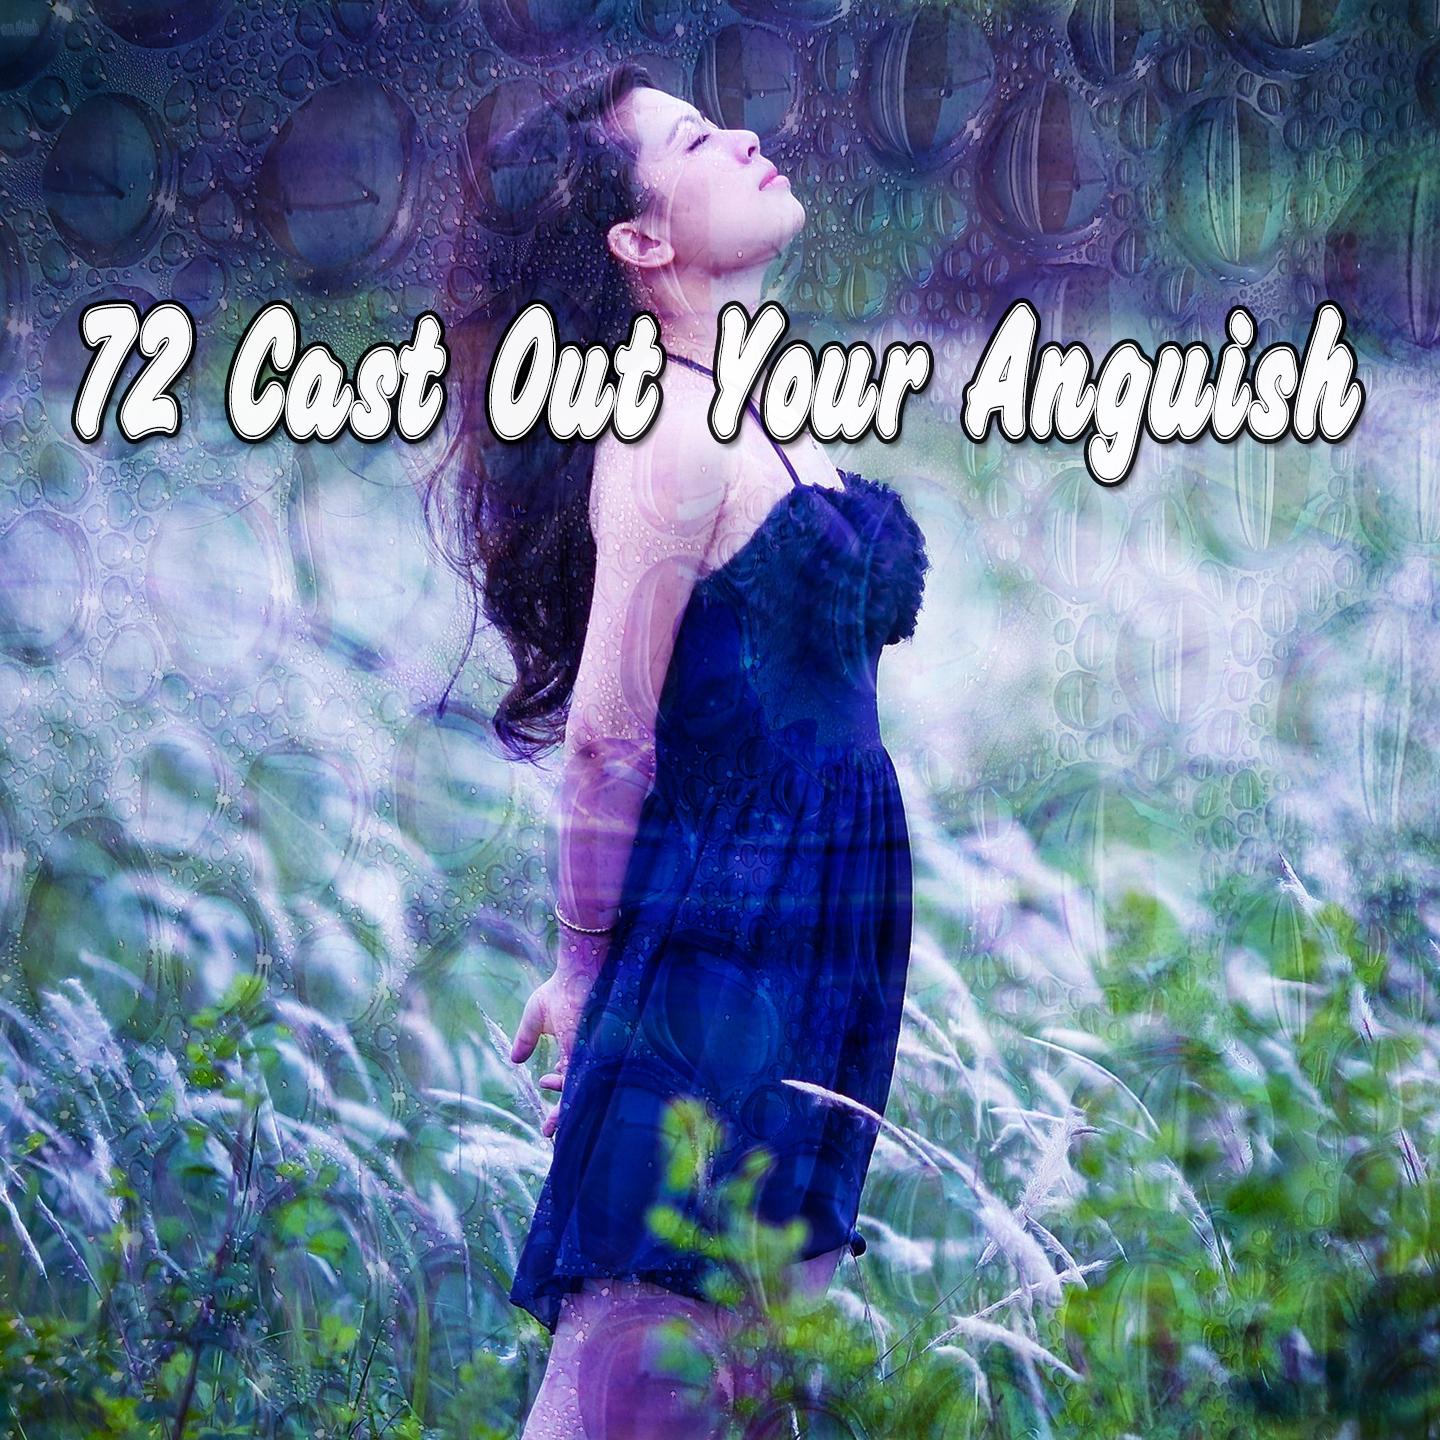 72 Cast out Your Anguish